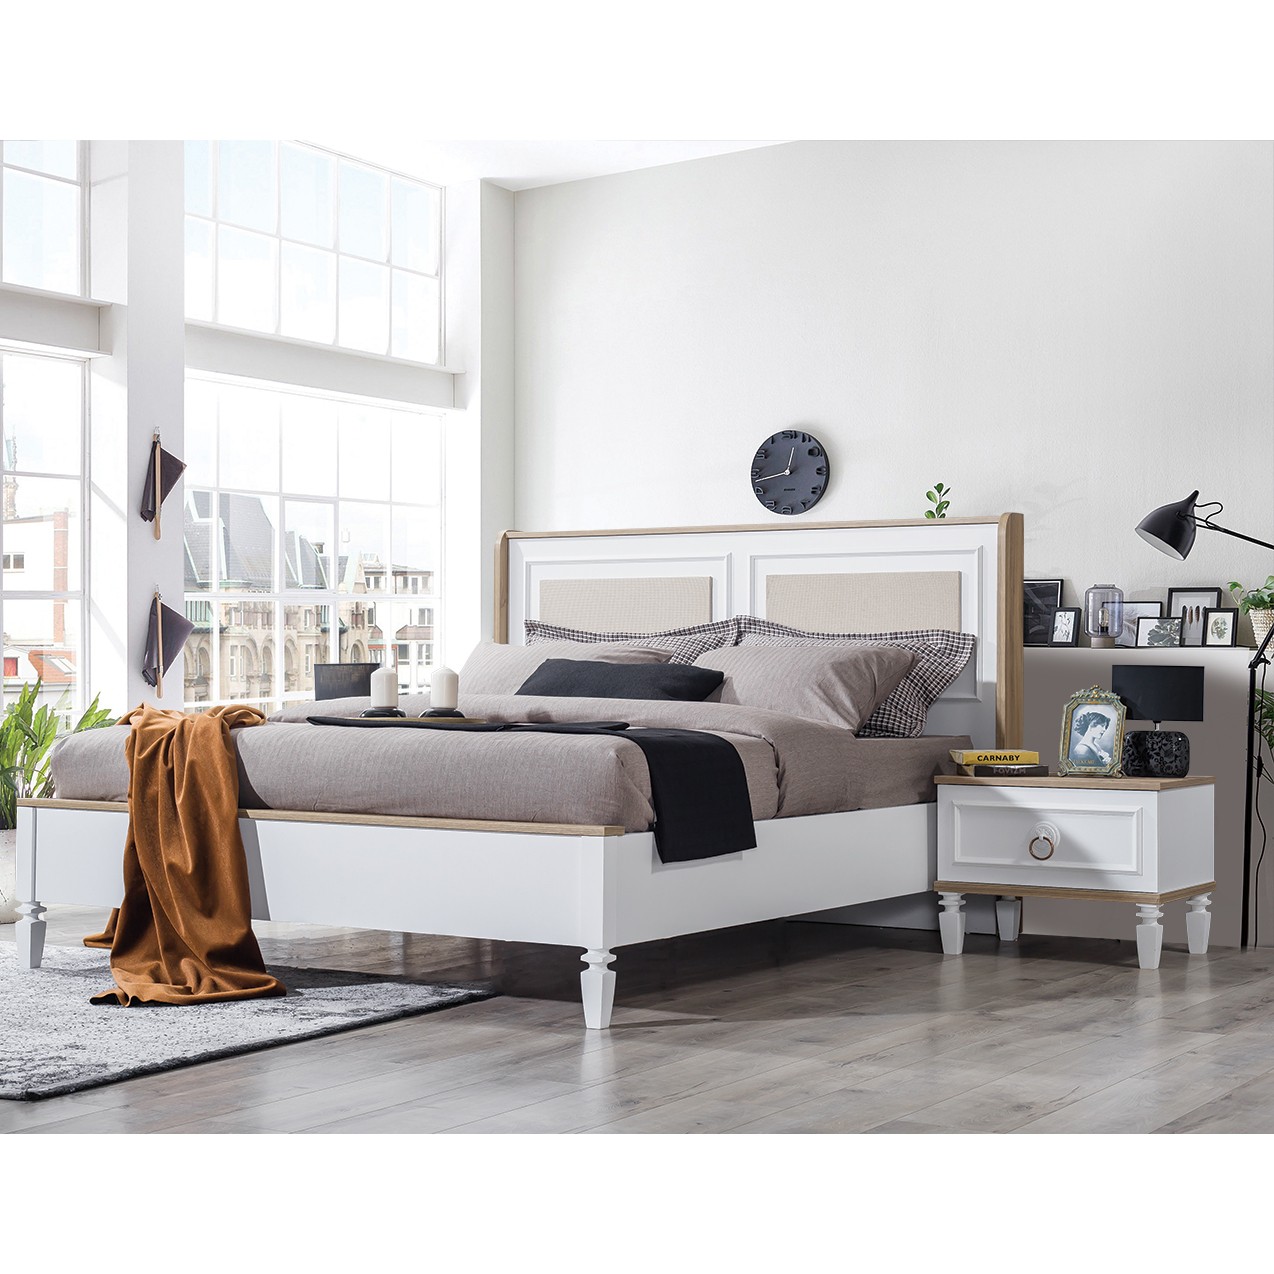 Mila Vol6 Bedroom (Bed Without Storage 160x200cm)